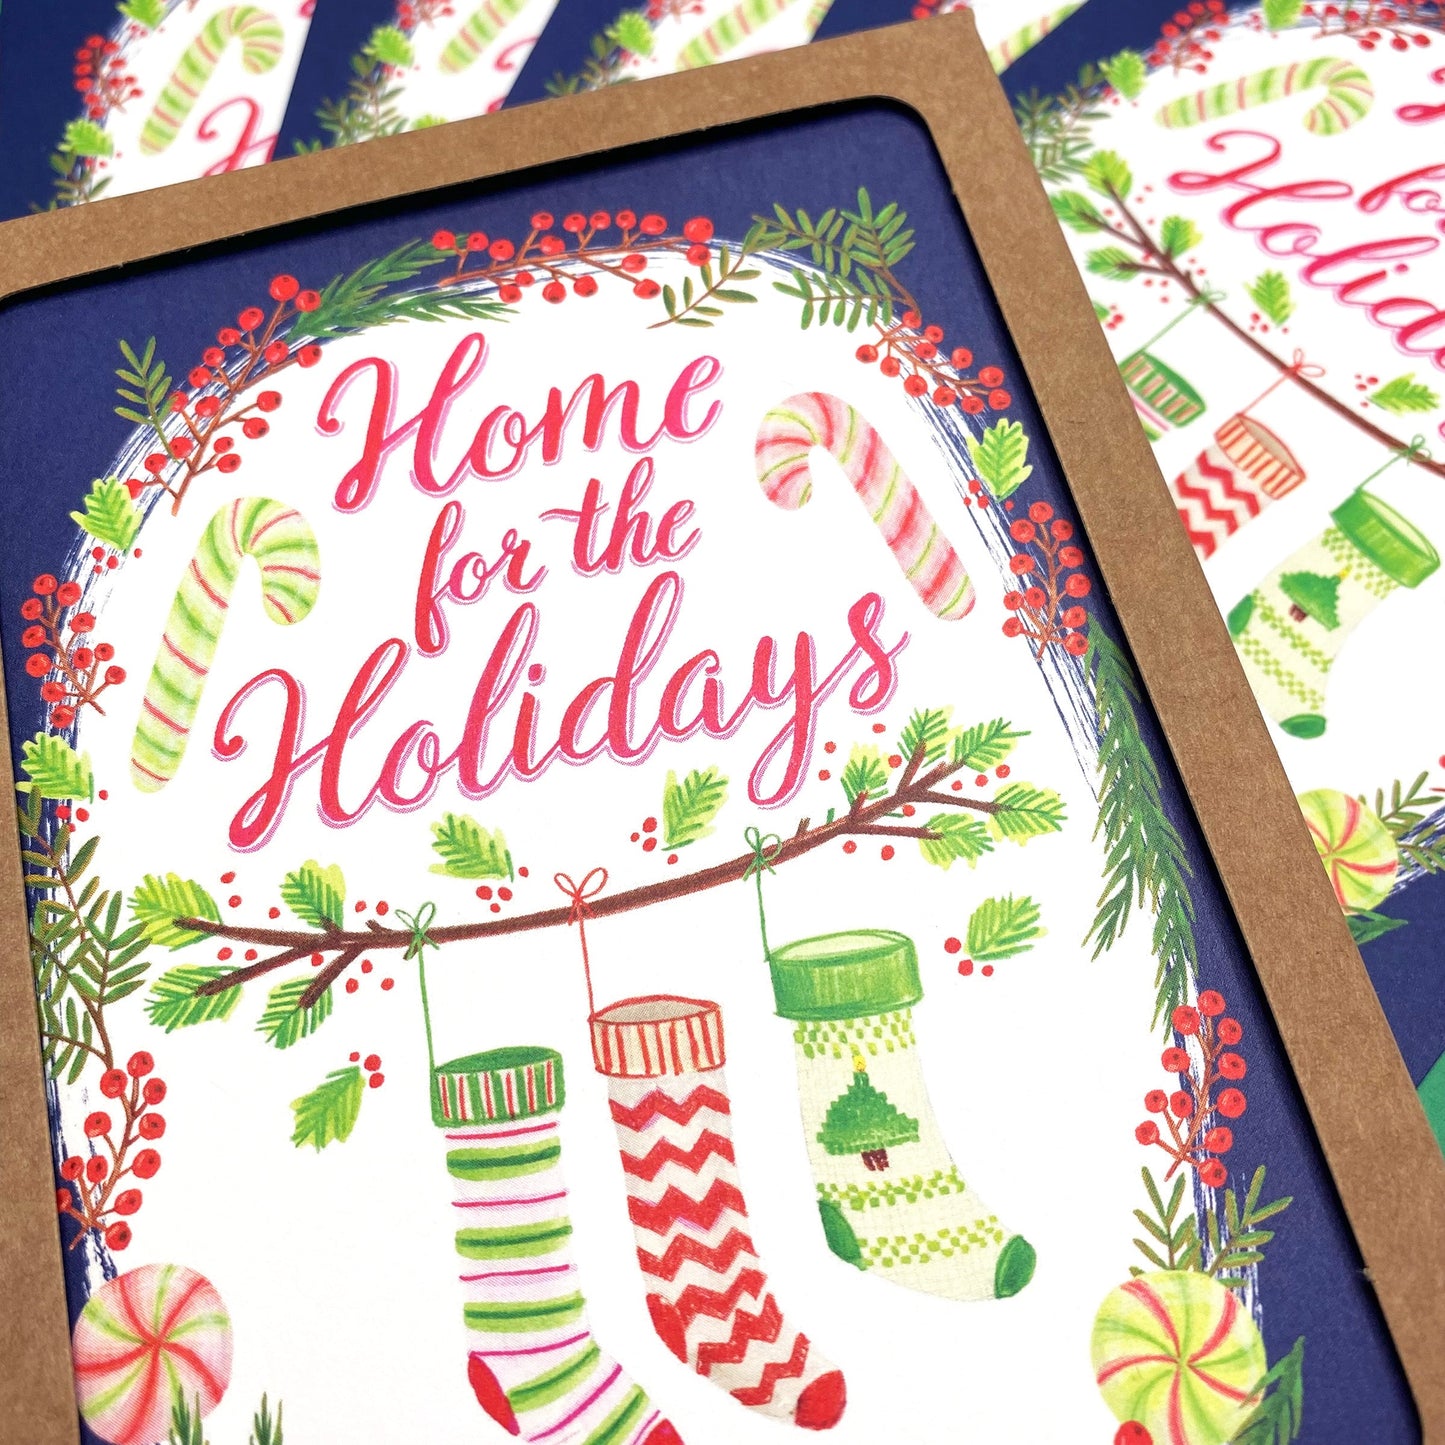 Boxed Set of 8 Cards-Home for the Holidays Greeting Cards-Wholesale